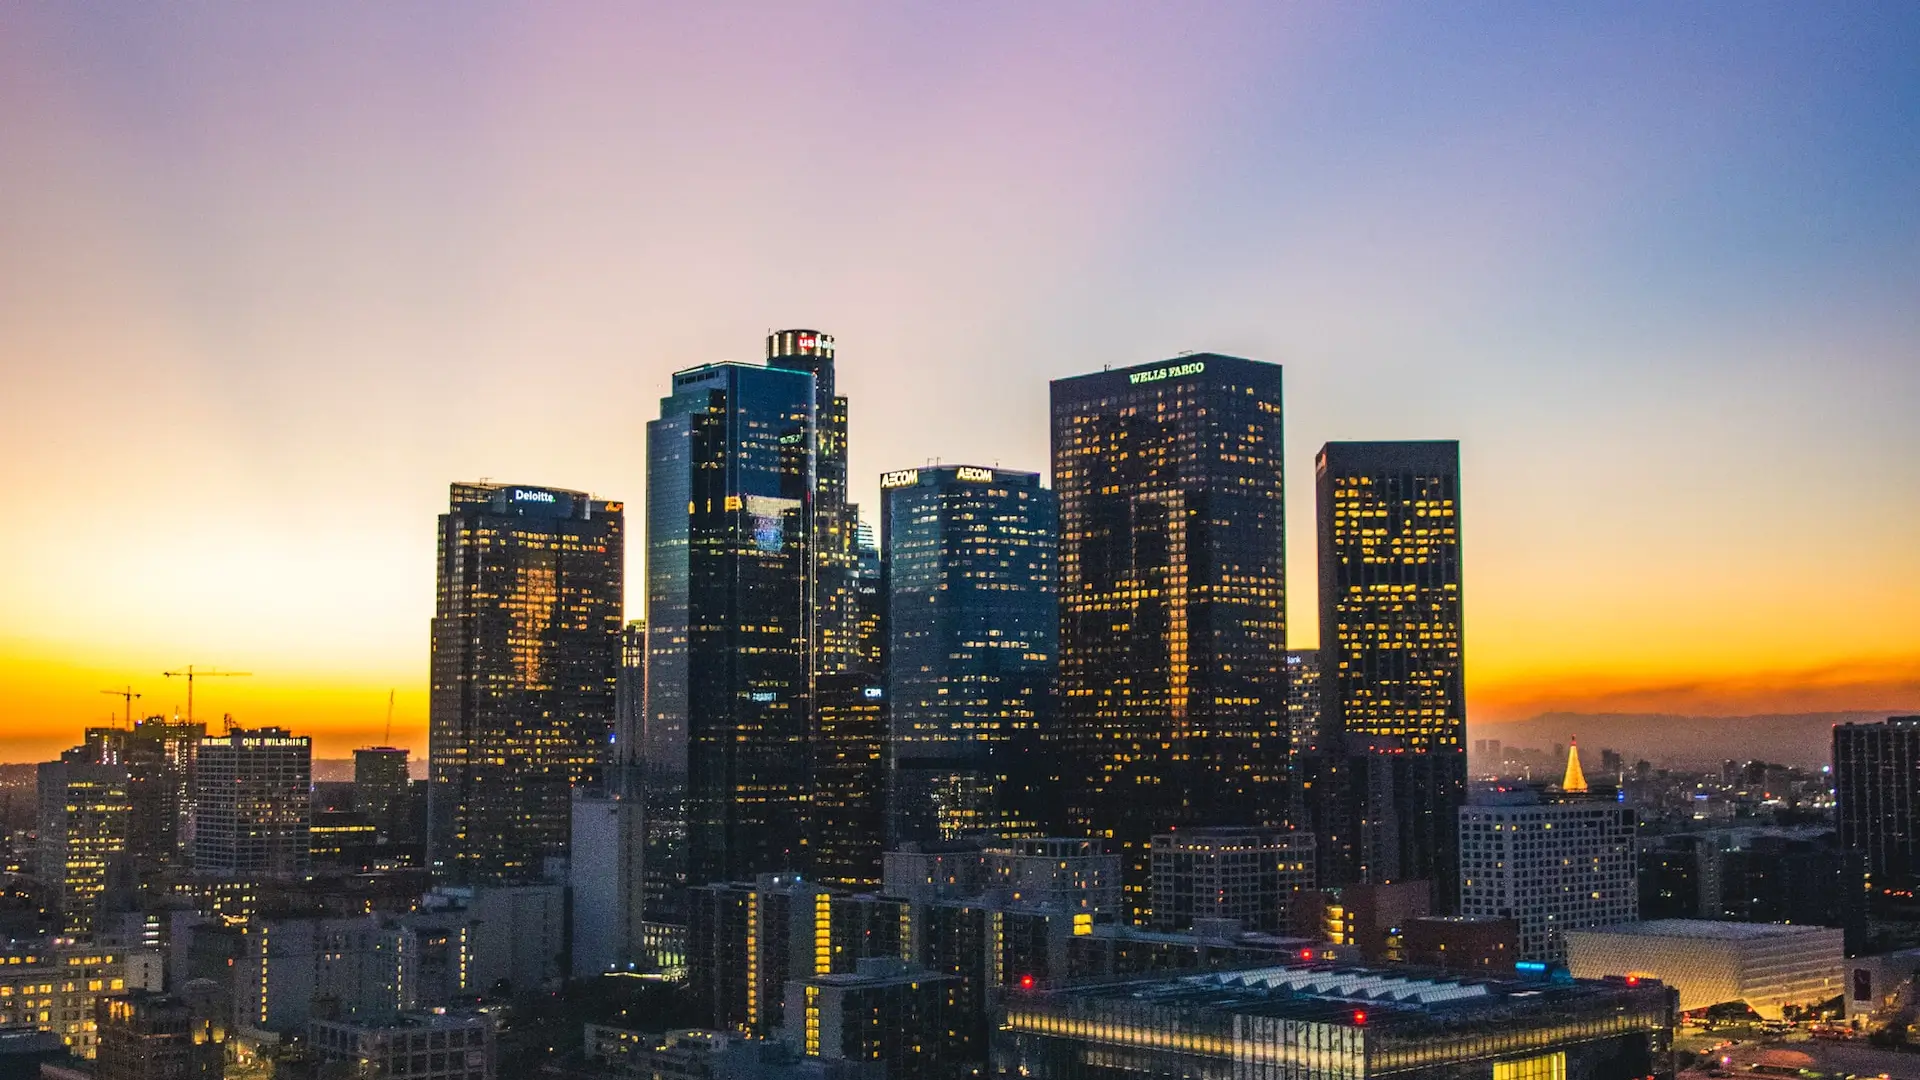 Los Angeles cityscape shot by Shea Rouda could see new green buildings with Series A funding for climate tech